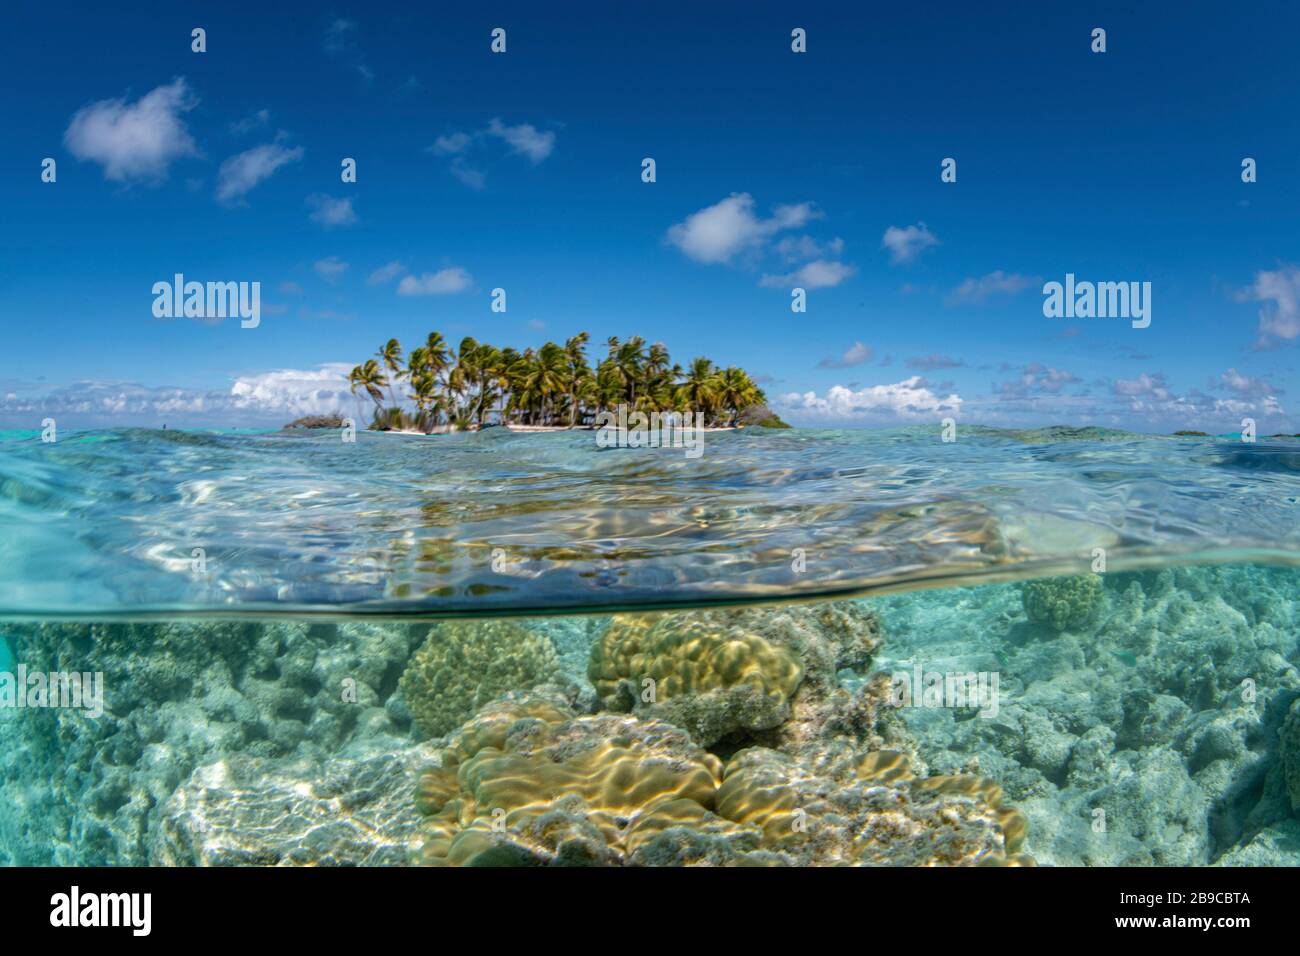 A shallow coral reef near a small island in Tahiti, French Polynesia. Stock Photo